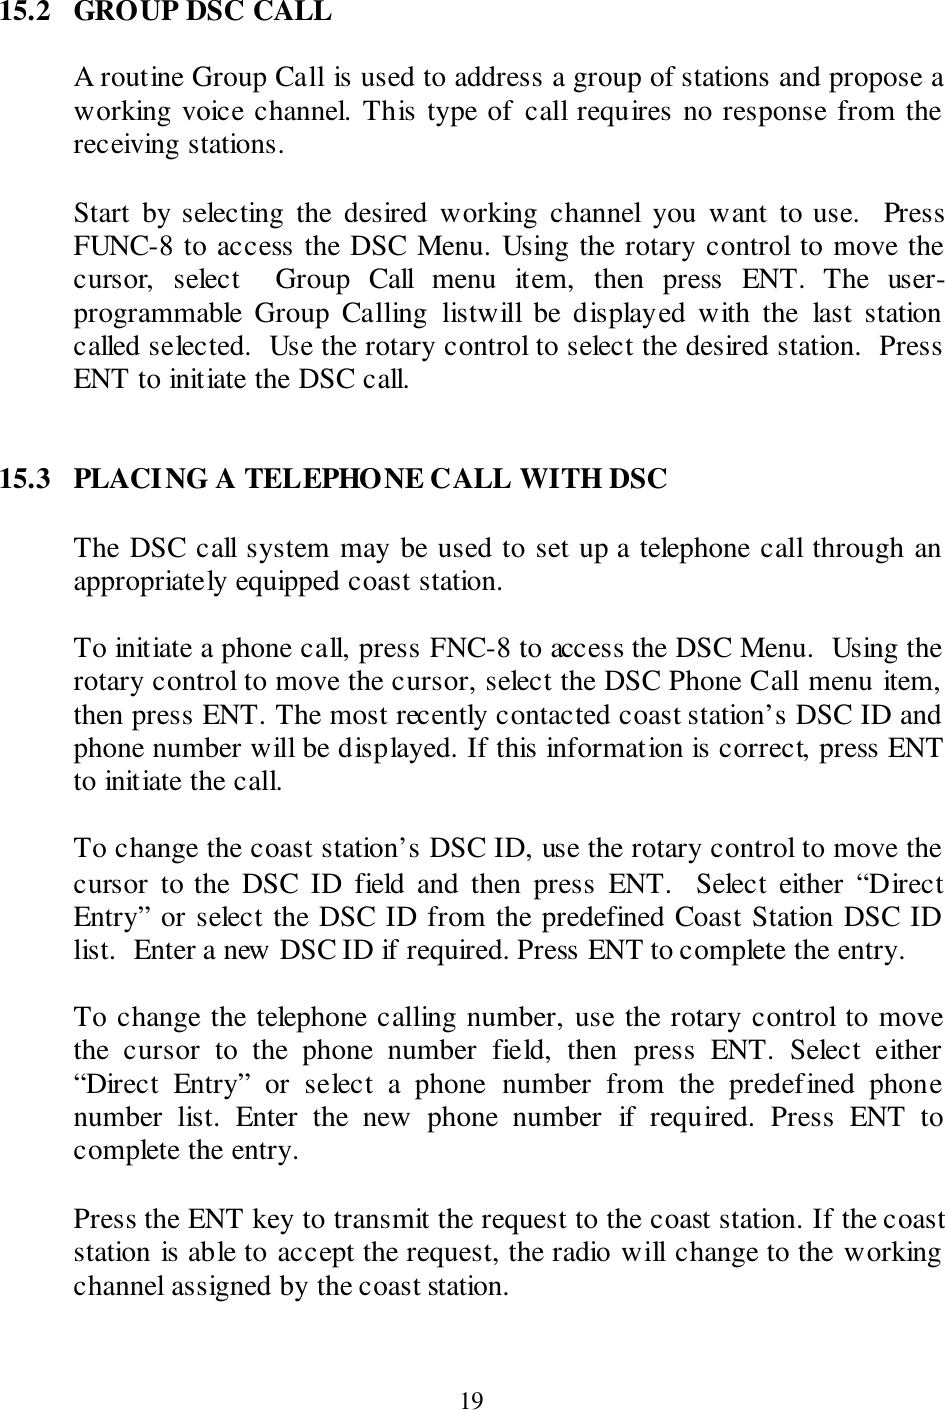  19 15.2  GROUP DSC CALL  A routine Group Call is used to address a group of stations and propose a working voice channel. This type of call requires no response from the receiving stations.  Start  by selecting  the  desired  working  channel  you  want  to  use.    Press FUNC-8 to access the DSC Menu. Using the rotary control to move the cursor,  select    Group  Call  menu  item,  then  press  ENT.  The  user-programmable  Group  Calling  listwill  be  displayed  with  the  last  station called selected.  Use the rotary control to select the desired station.  Press ENT to initiate the DSC call.   15.3  PLACING A TELEPHONE CALL WITH DSC  The DSC call system may be used to set up a telephone call through an appropriately equipped coast station.  To initiate a phone call, press FNC-8 to access the DSC Menu.  Using the rotary control to move the cursor, select the DSC Phone Call menu item, then press ENT. The most recently contacted coast station’s DSC ID and phone number will be displayed. If this information is correct, press ENT to initiate the call.  To change the coast station’s DSC ID, use the rotary control to move the cursor  to the  DSC  ID  field  and  then  press  ENT.   Select  either  “Direct Entry” or select the DSC ID from the predefined Coast Station DSC ID list.  Enter a new DSC ID if required. Press ENT to complete the entry.  To change the telephone calling number, use the rotary control to move the  cursor  to  the  phone  number  field,  then  press  ENT.  Select  either “Direct  Entry”  or  select  a  phone  number  from  the  predefined  phone number  list.  Enter  the  new  phone  number  if  required.  Press  ENT  to complete the entry.  Press the ENT key to transmit the request to the coast station. If the coast station is able to accept the request, the radio will change to the working channel assigned by the coast station.  